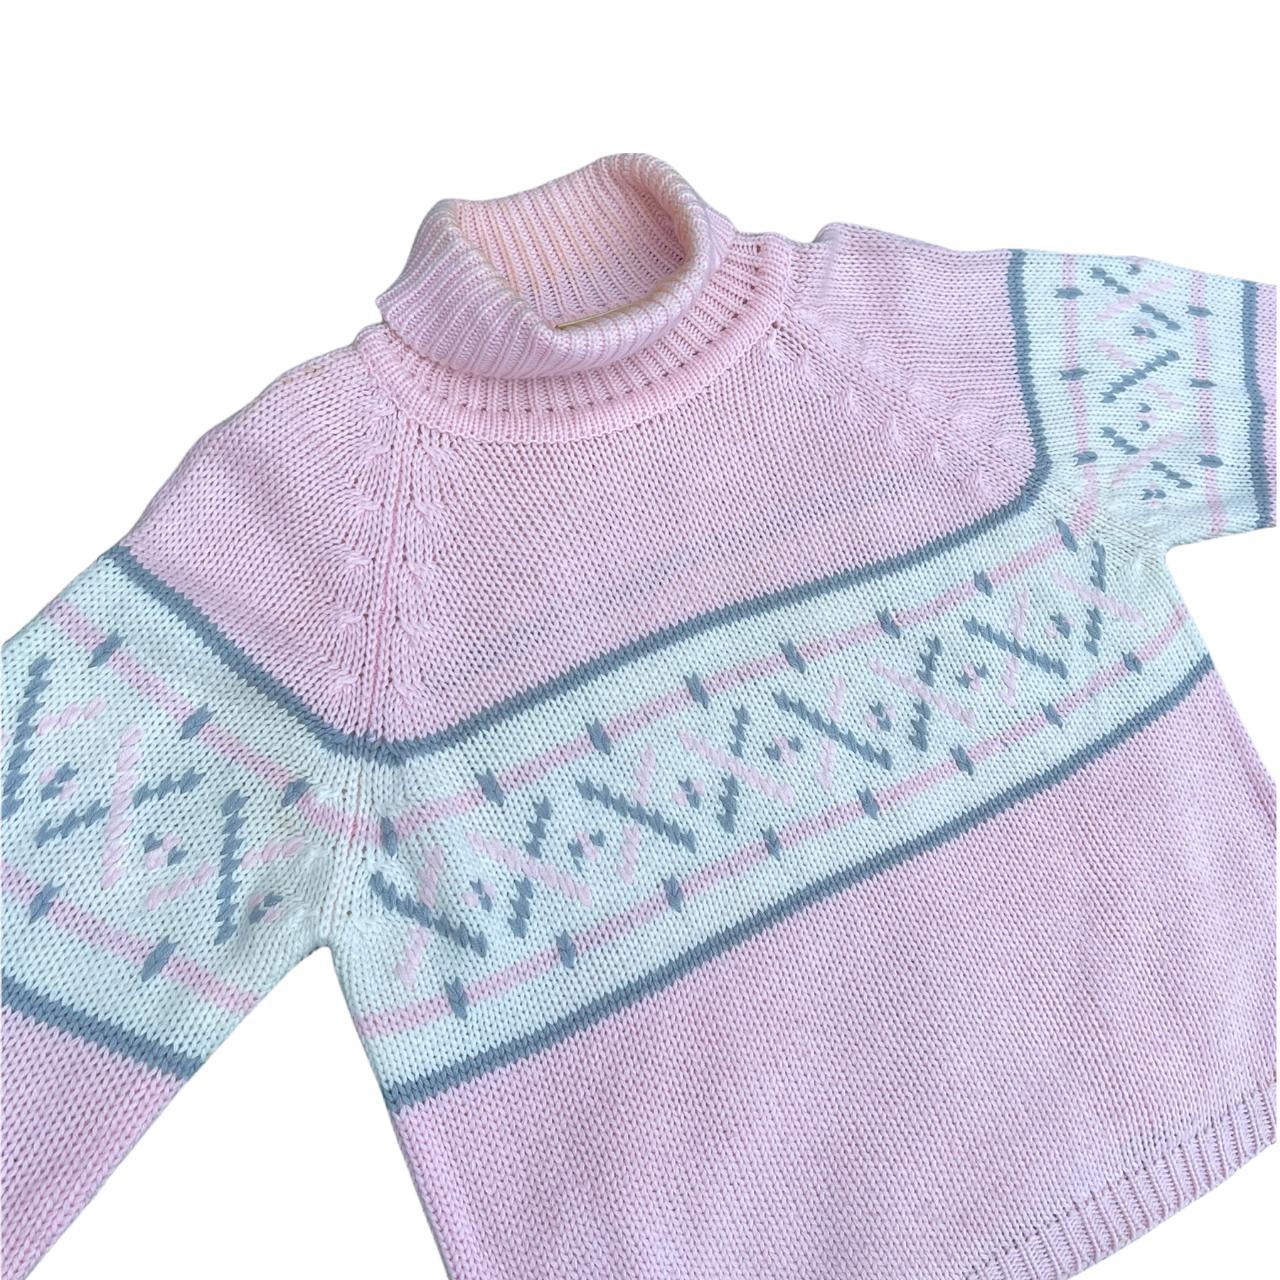 Product Image 3 - Cute Pink Turtleneck Sweater

Pink &